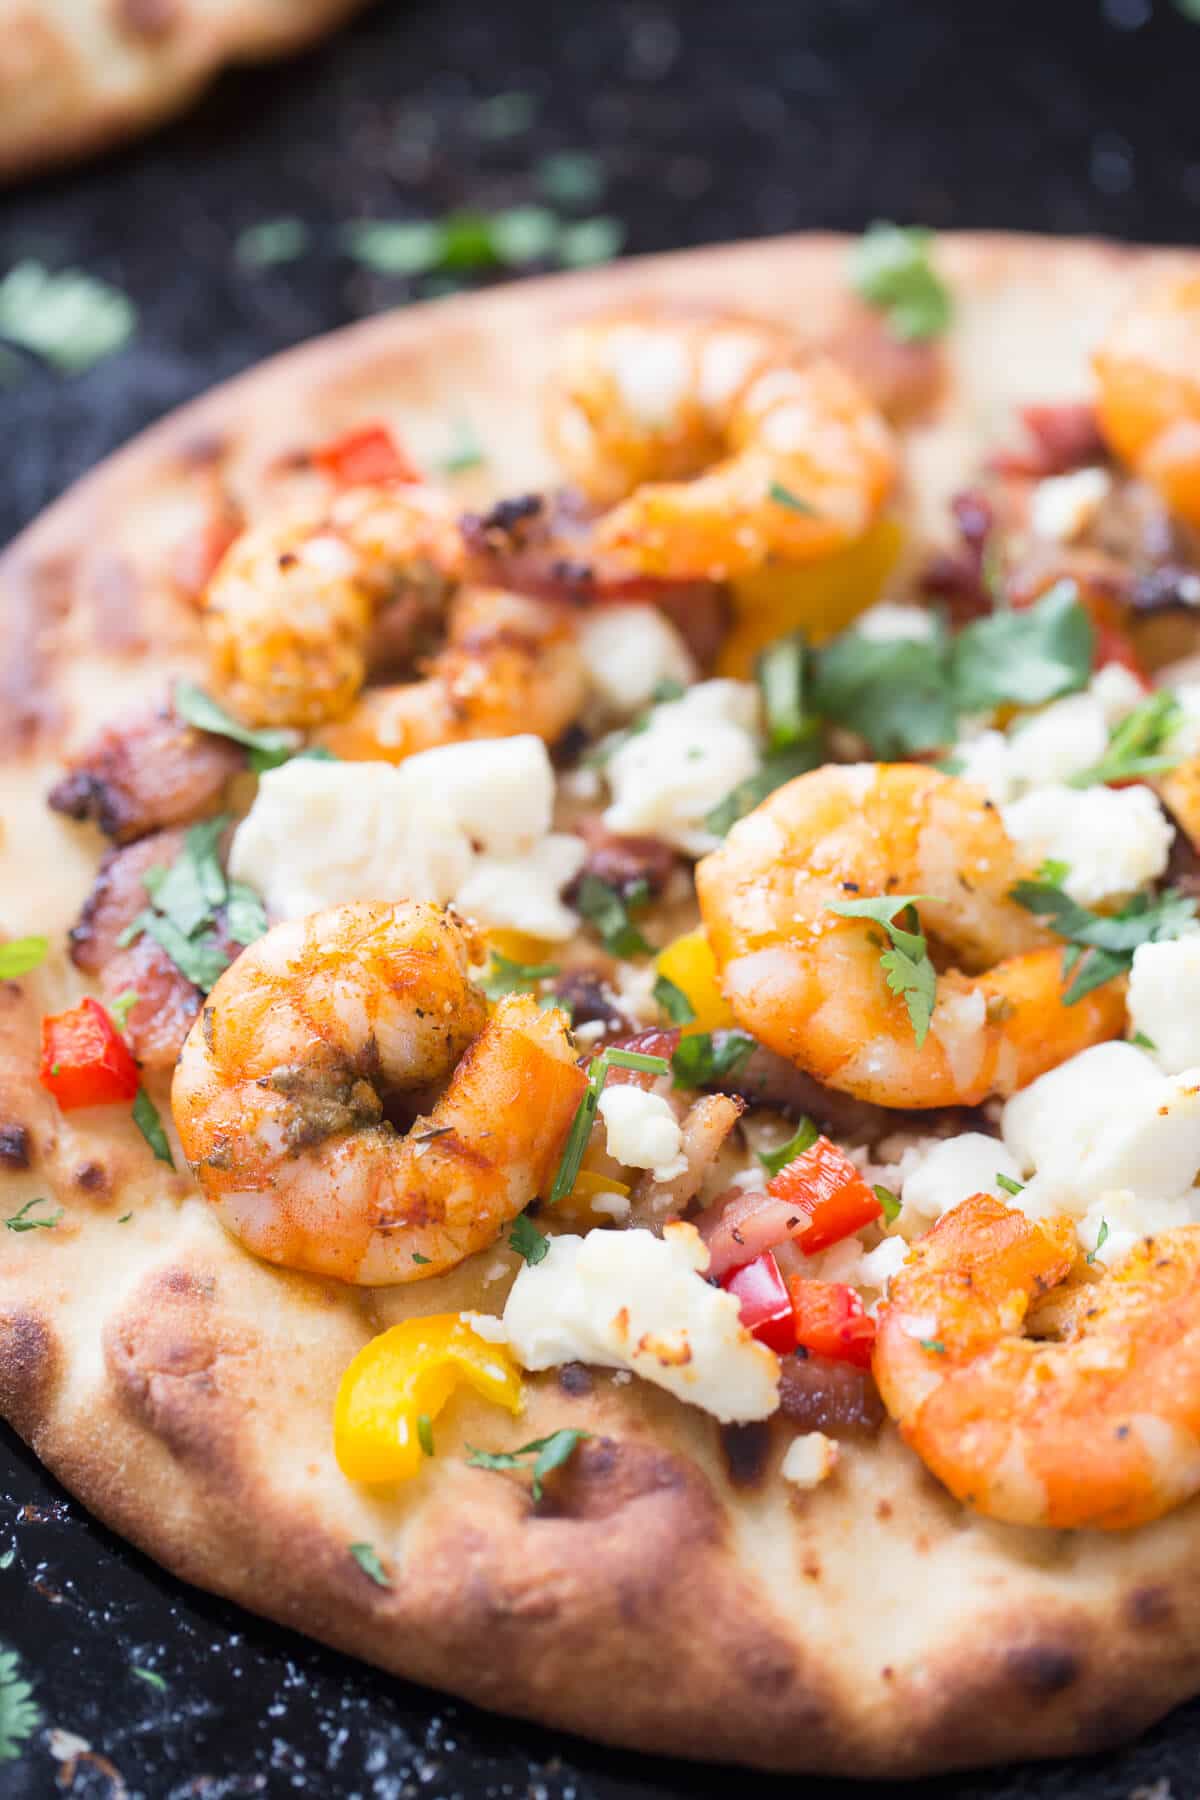 This Cajun shrimp pizza features spiced up shrimp baked on naan bread! Dinner couldn't be simpler!